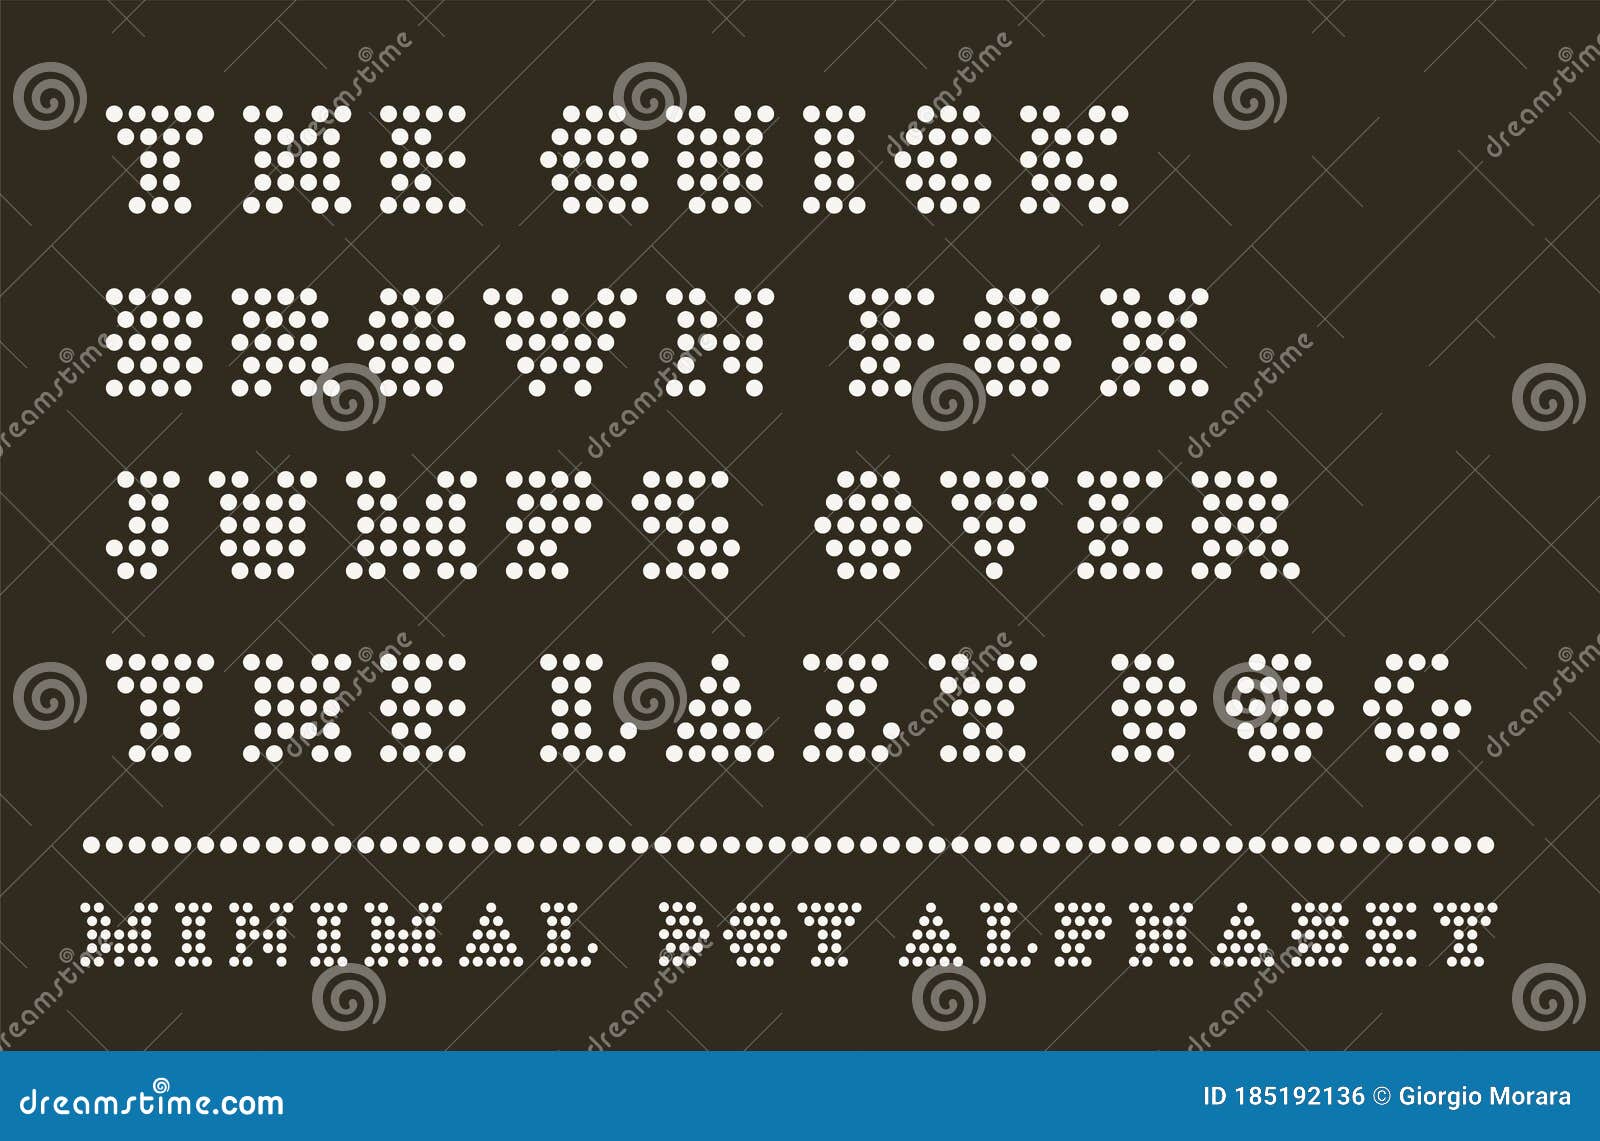 dotted font capitals vectior typeset